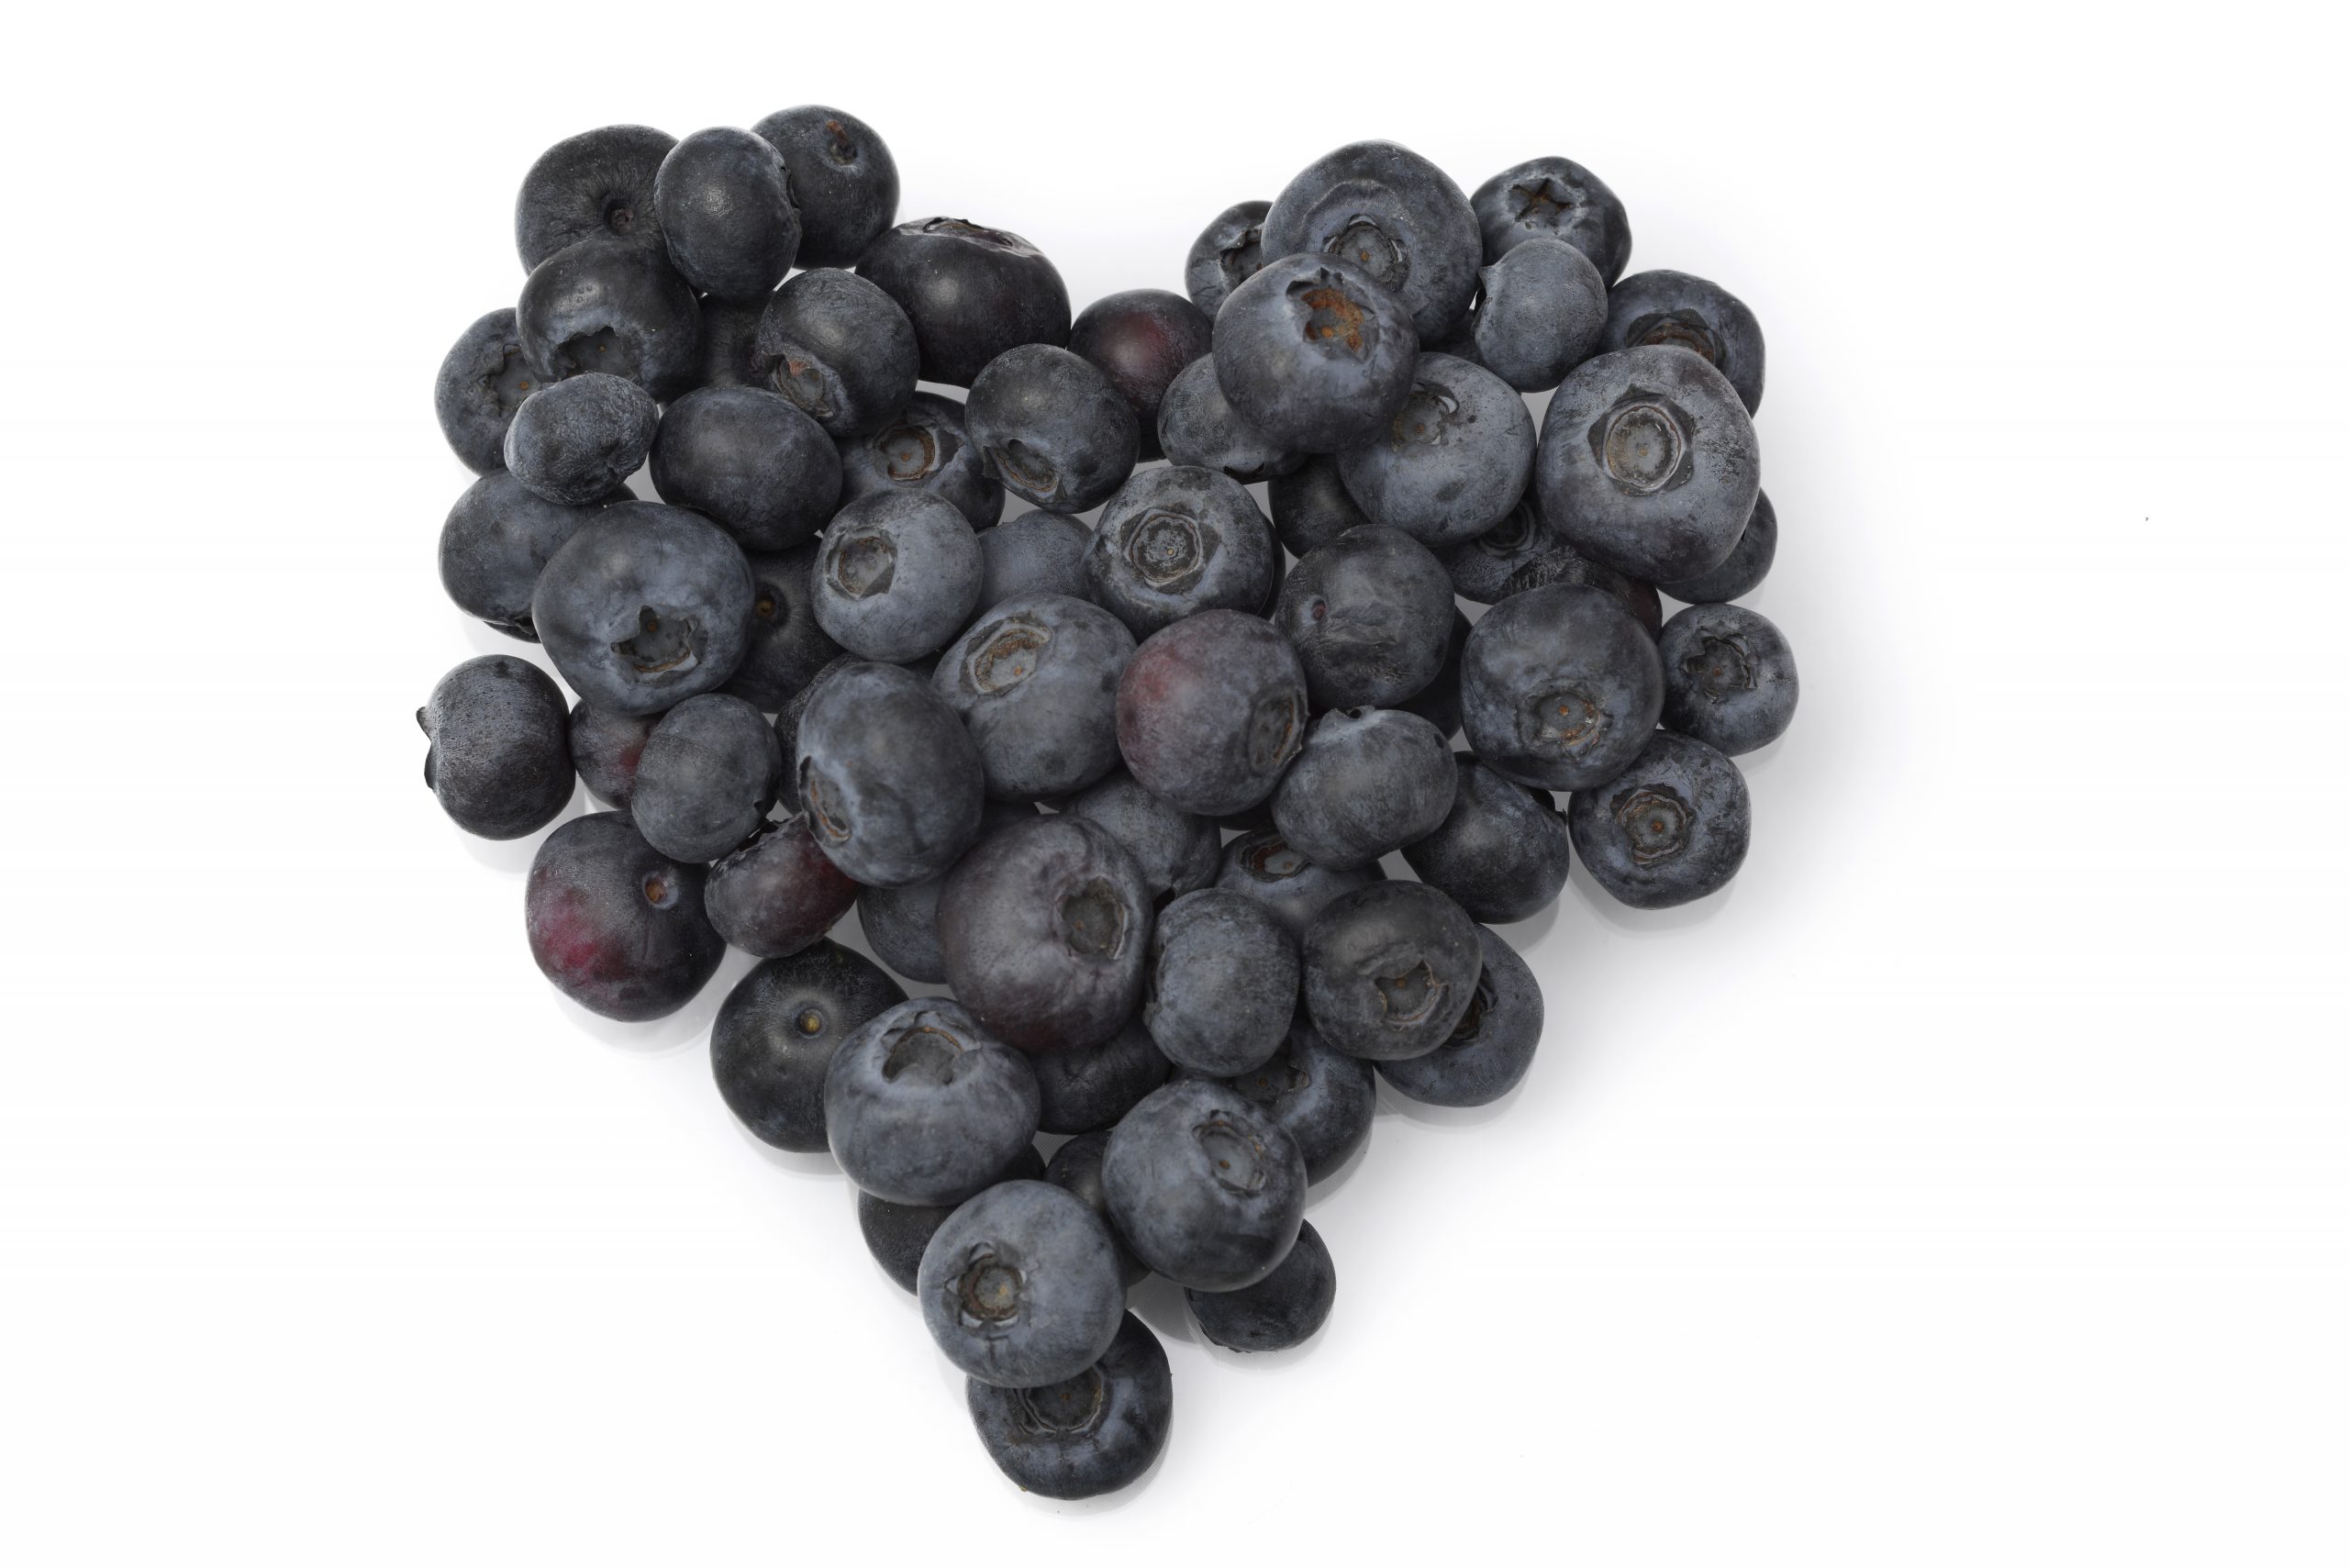 benefits of blueberries, health benefits of blueberries, benefits of eating blueberries, benefits of blueberries for skin